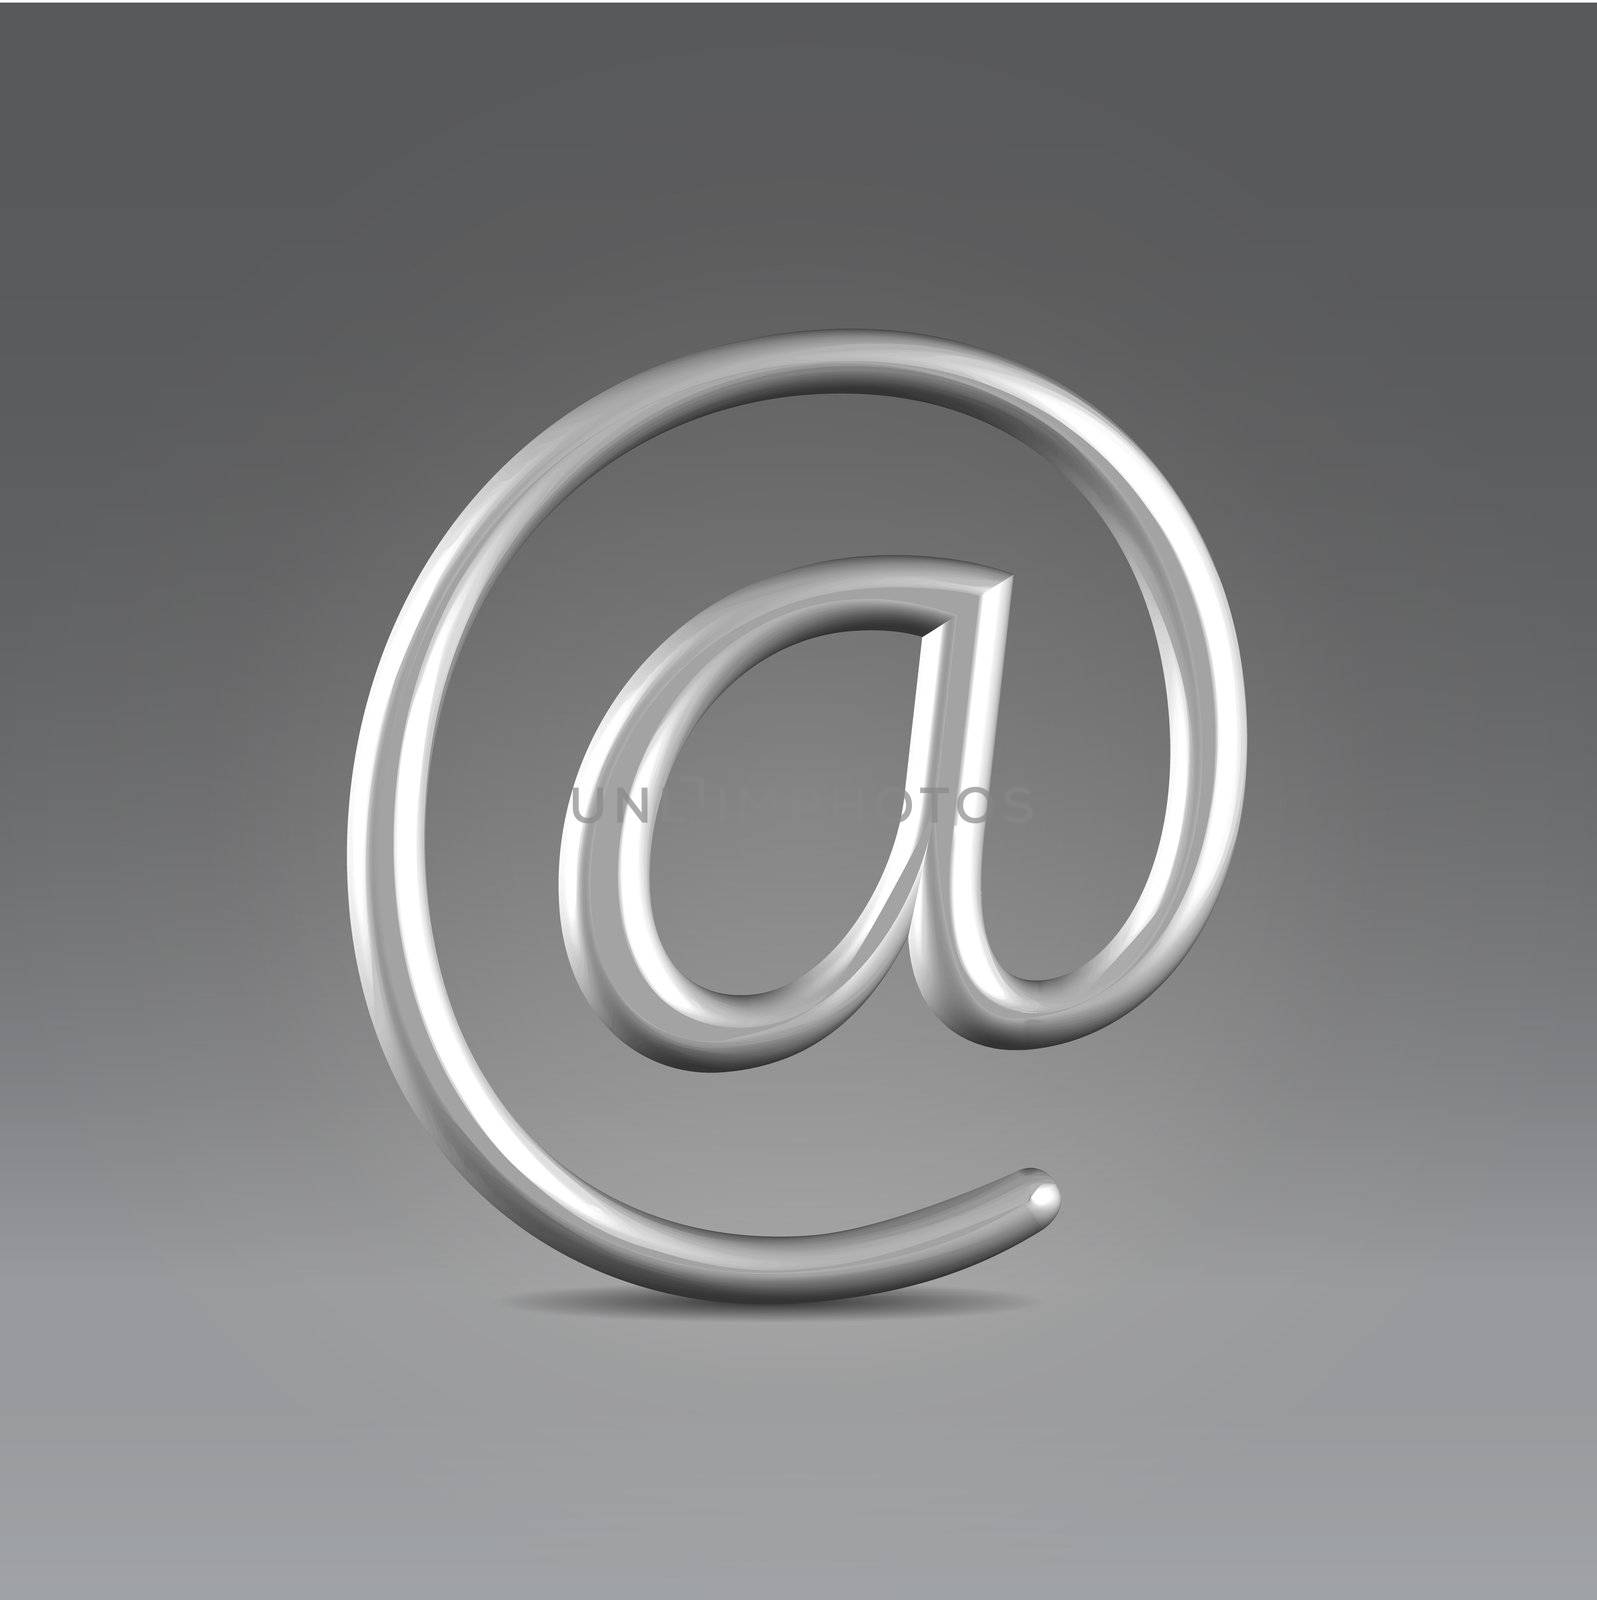 Silver shining metallic email symbol by pics4sale